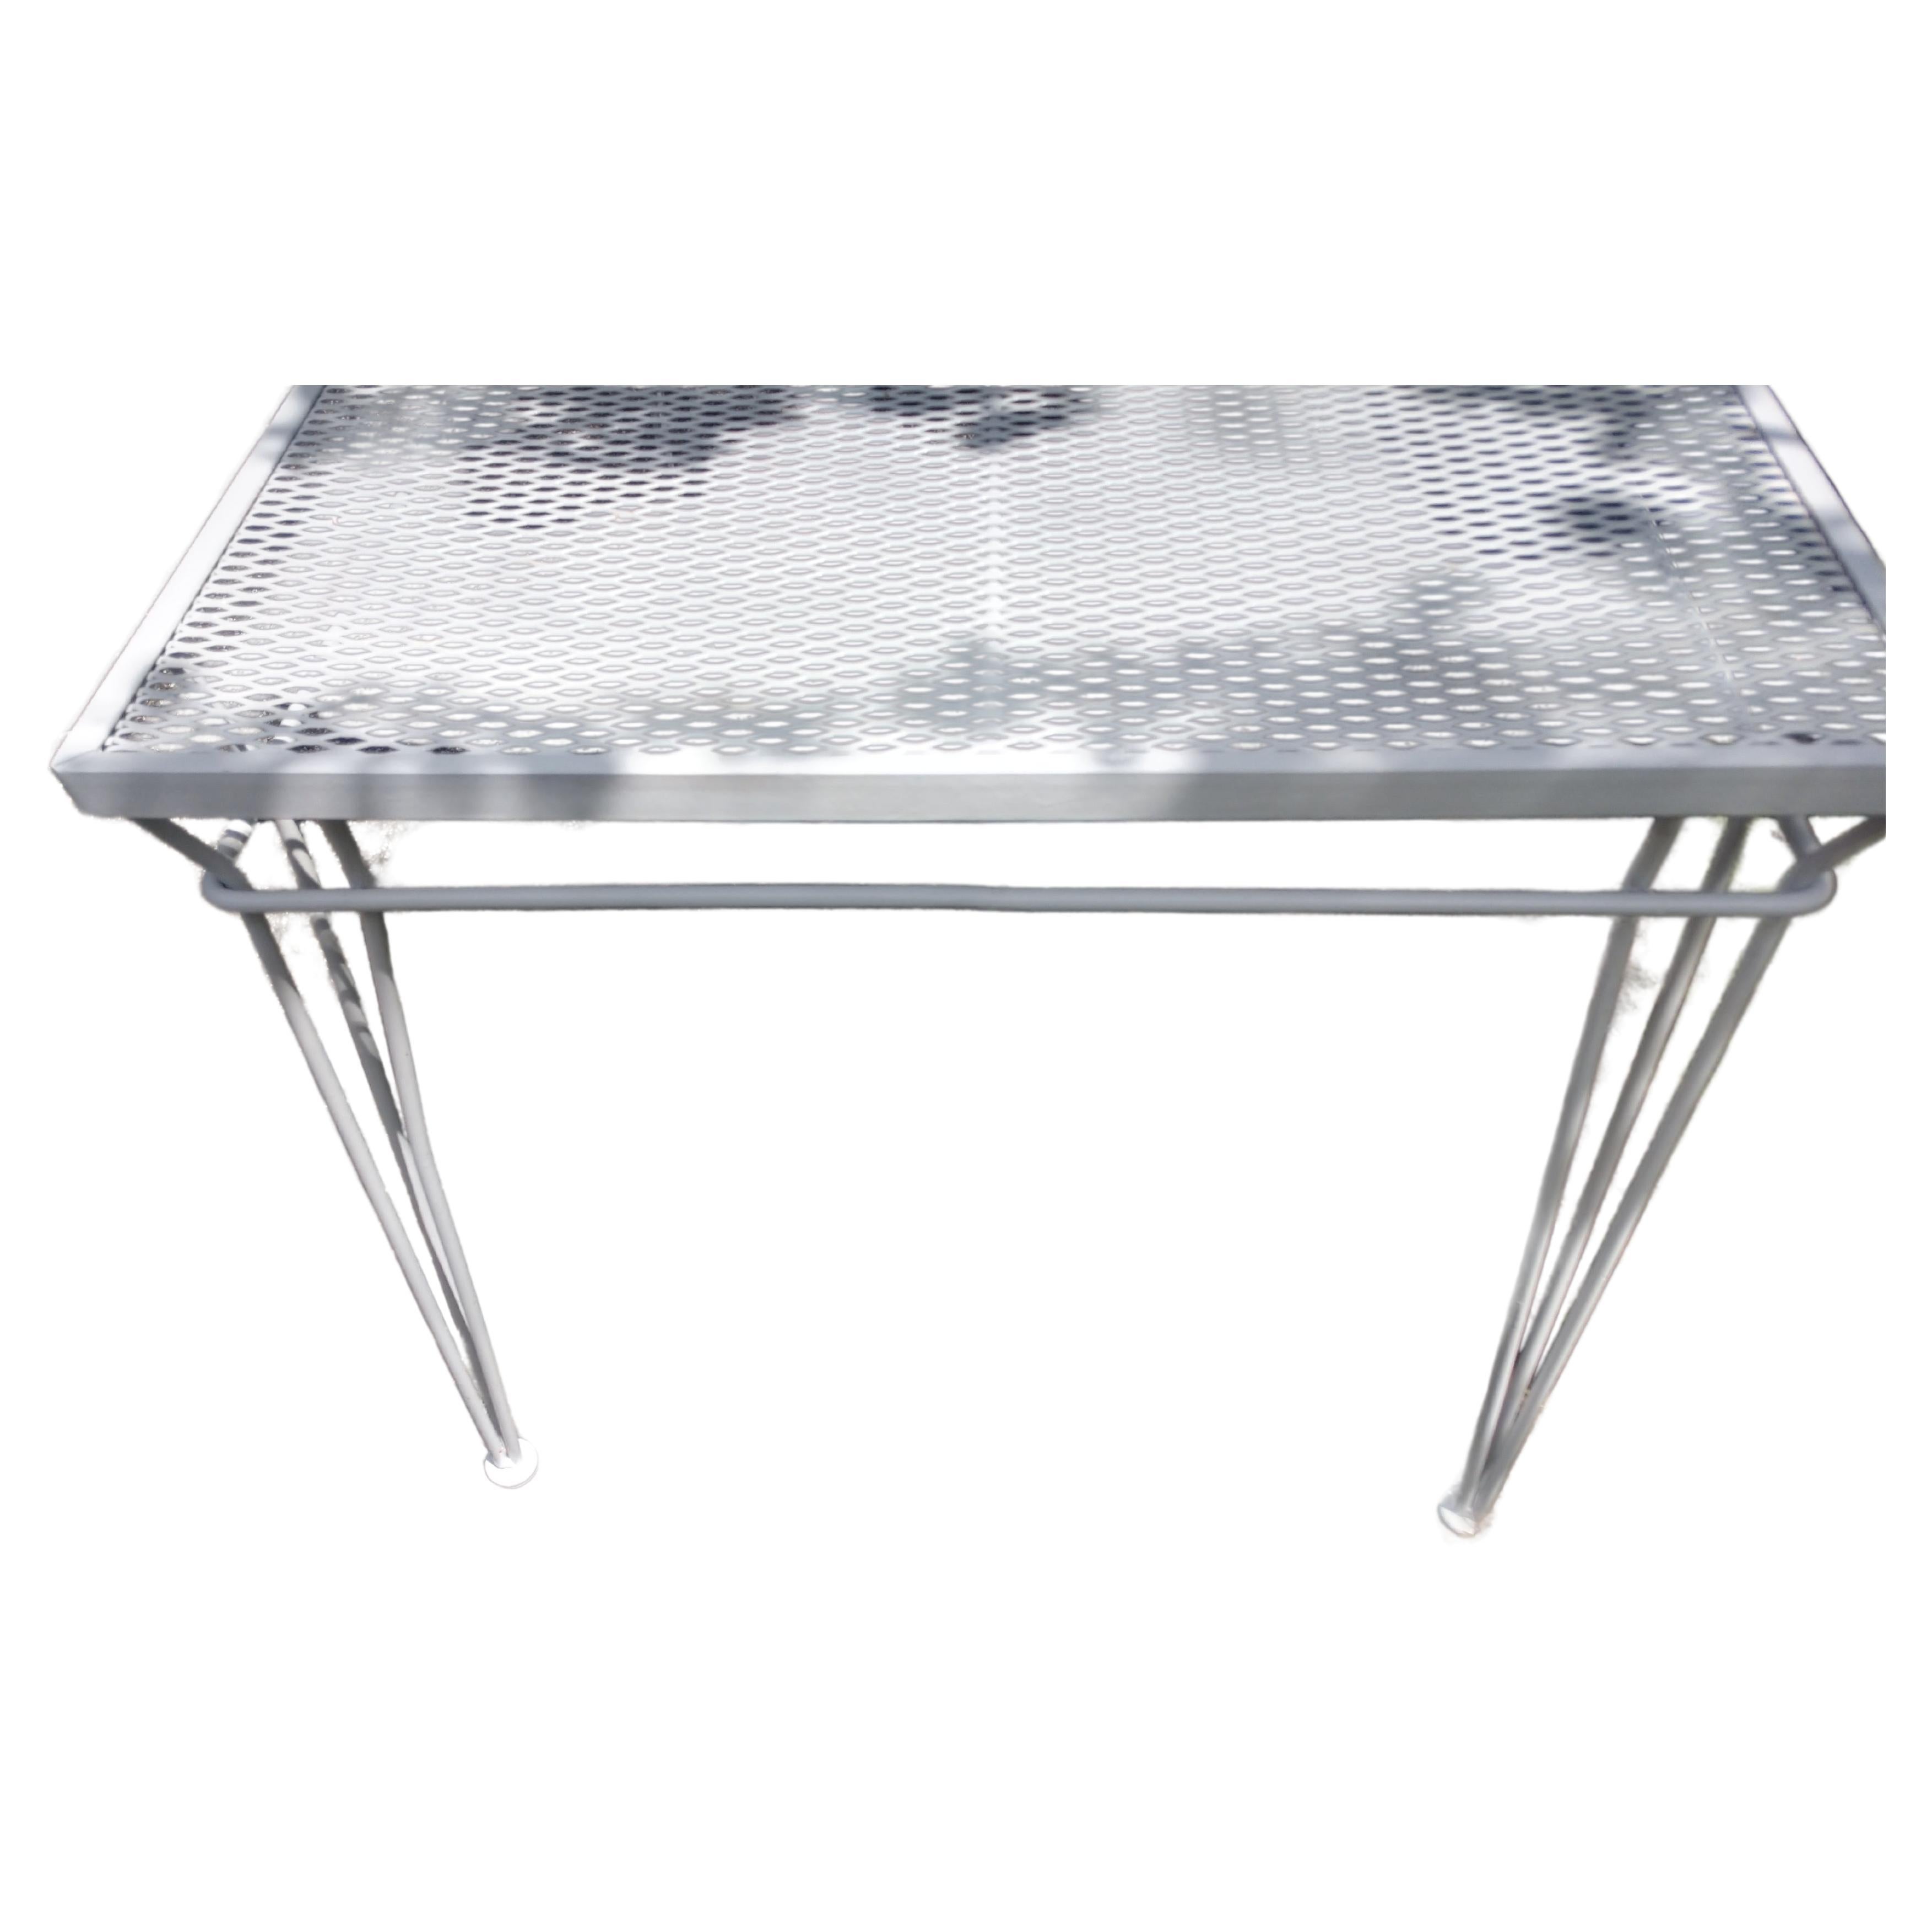 American Mid-Century Modern Rectangular Mesh Top Outdoor Dining Table by John Salterini For Sale